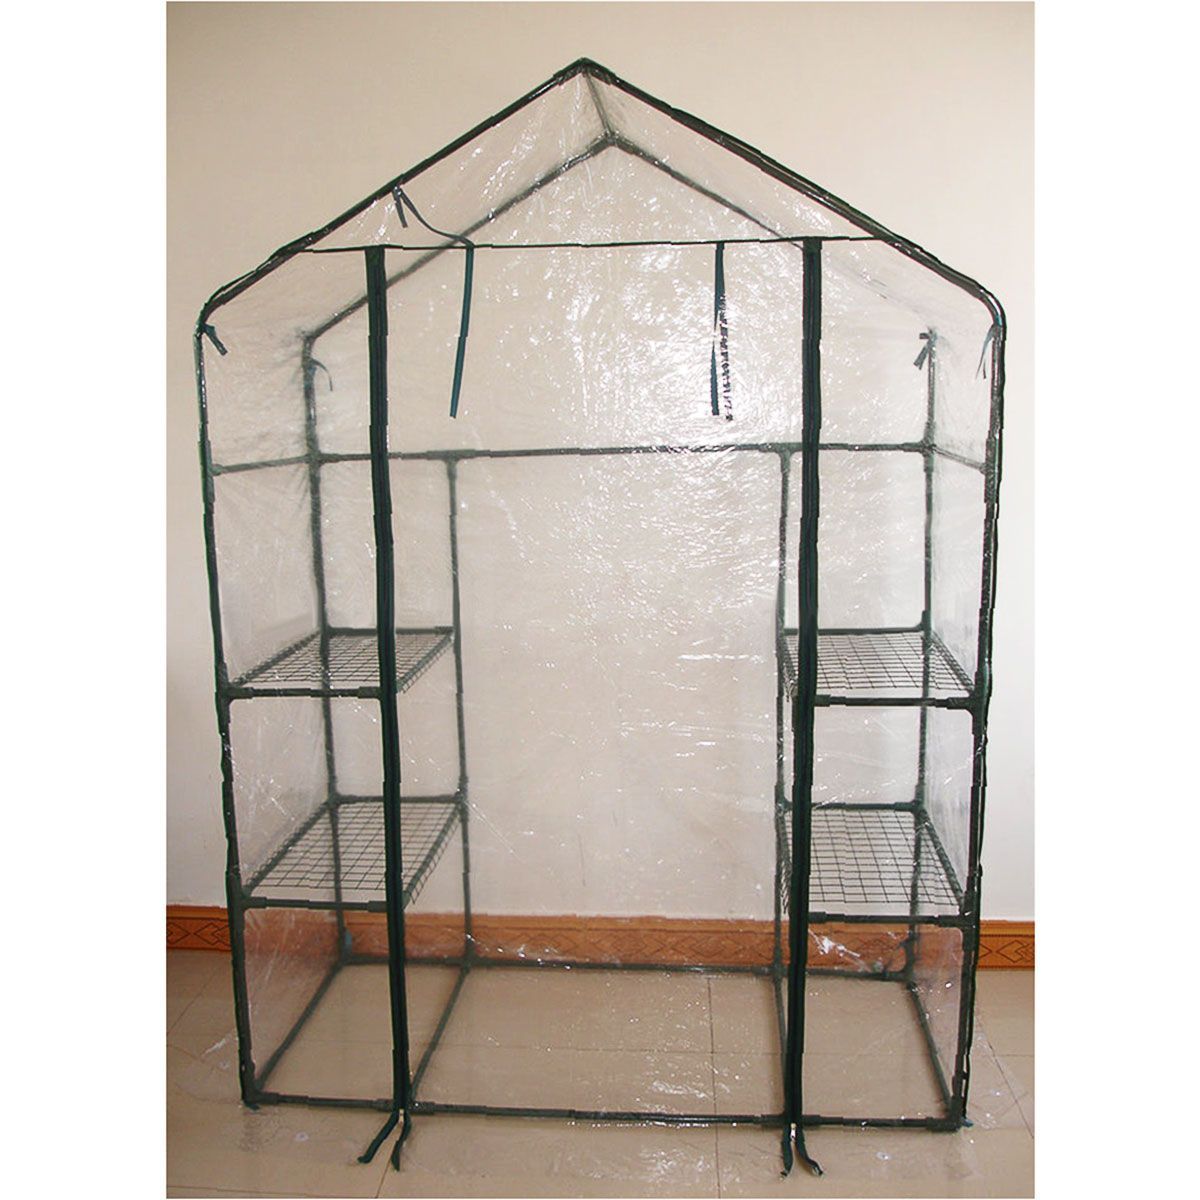 Portable-3-Tier-6-Shelves-Walk-In-Mini-Greenhouse-Outdoor-Plant-Gardening-Clear-Cover-1678160